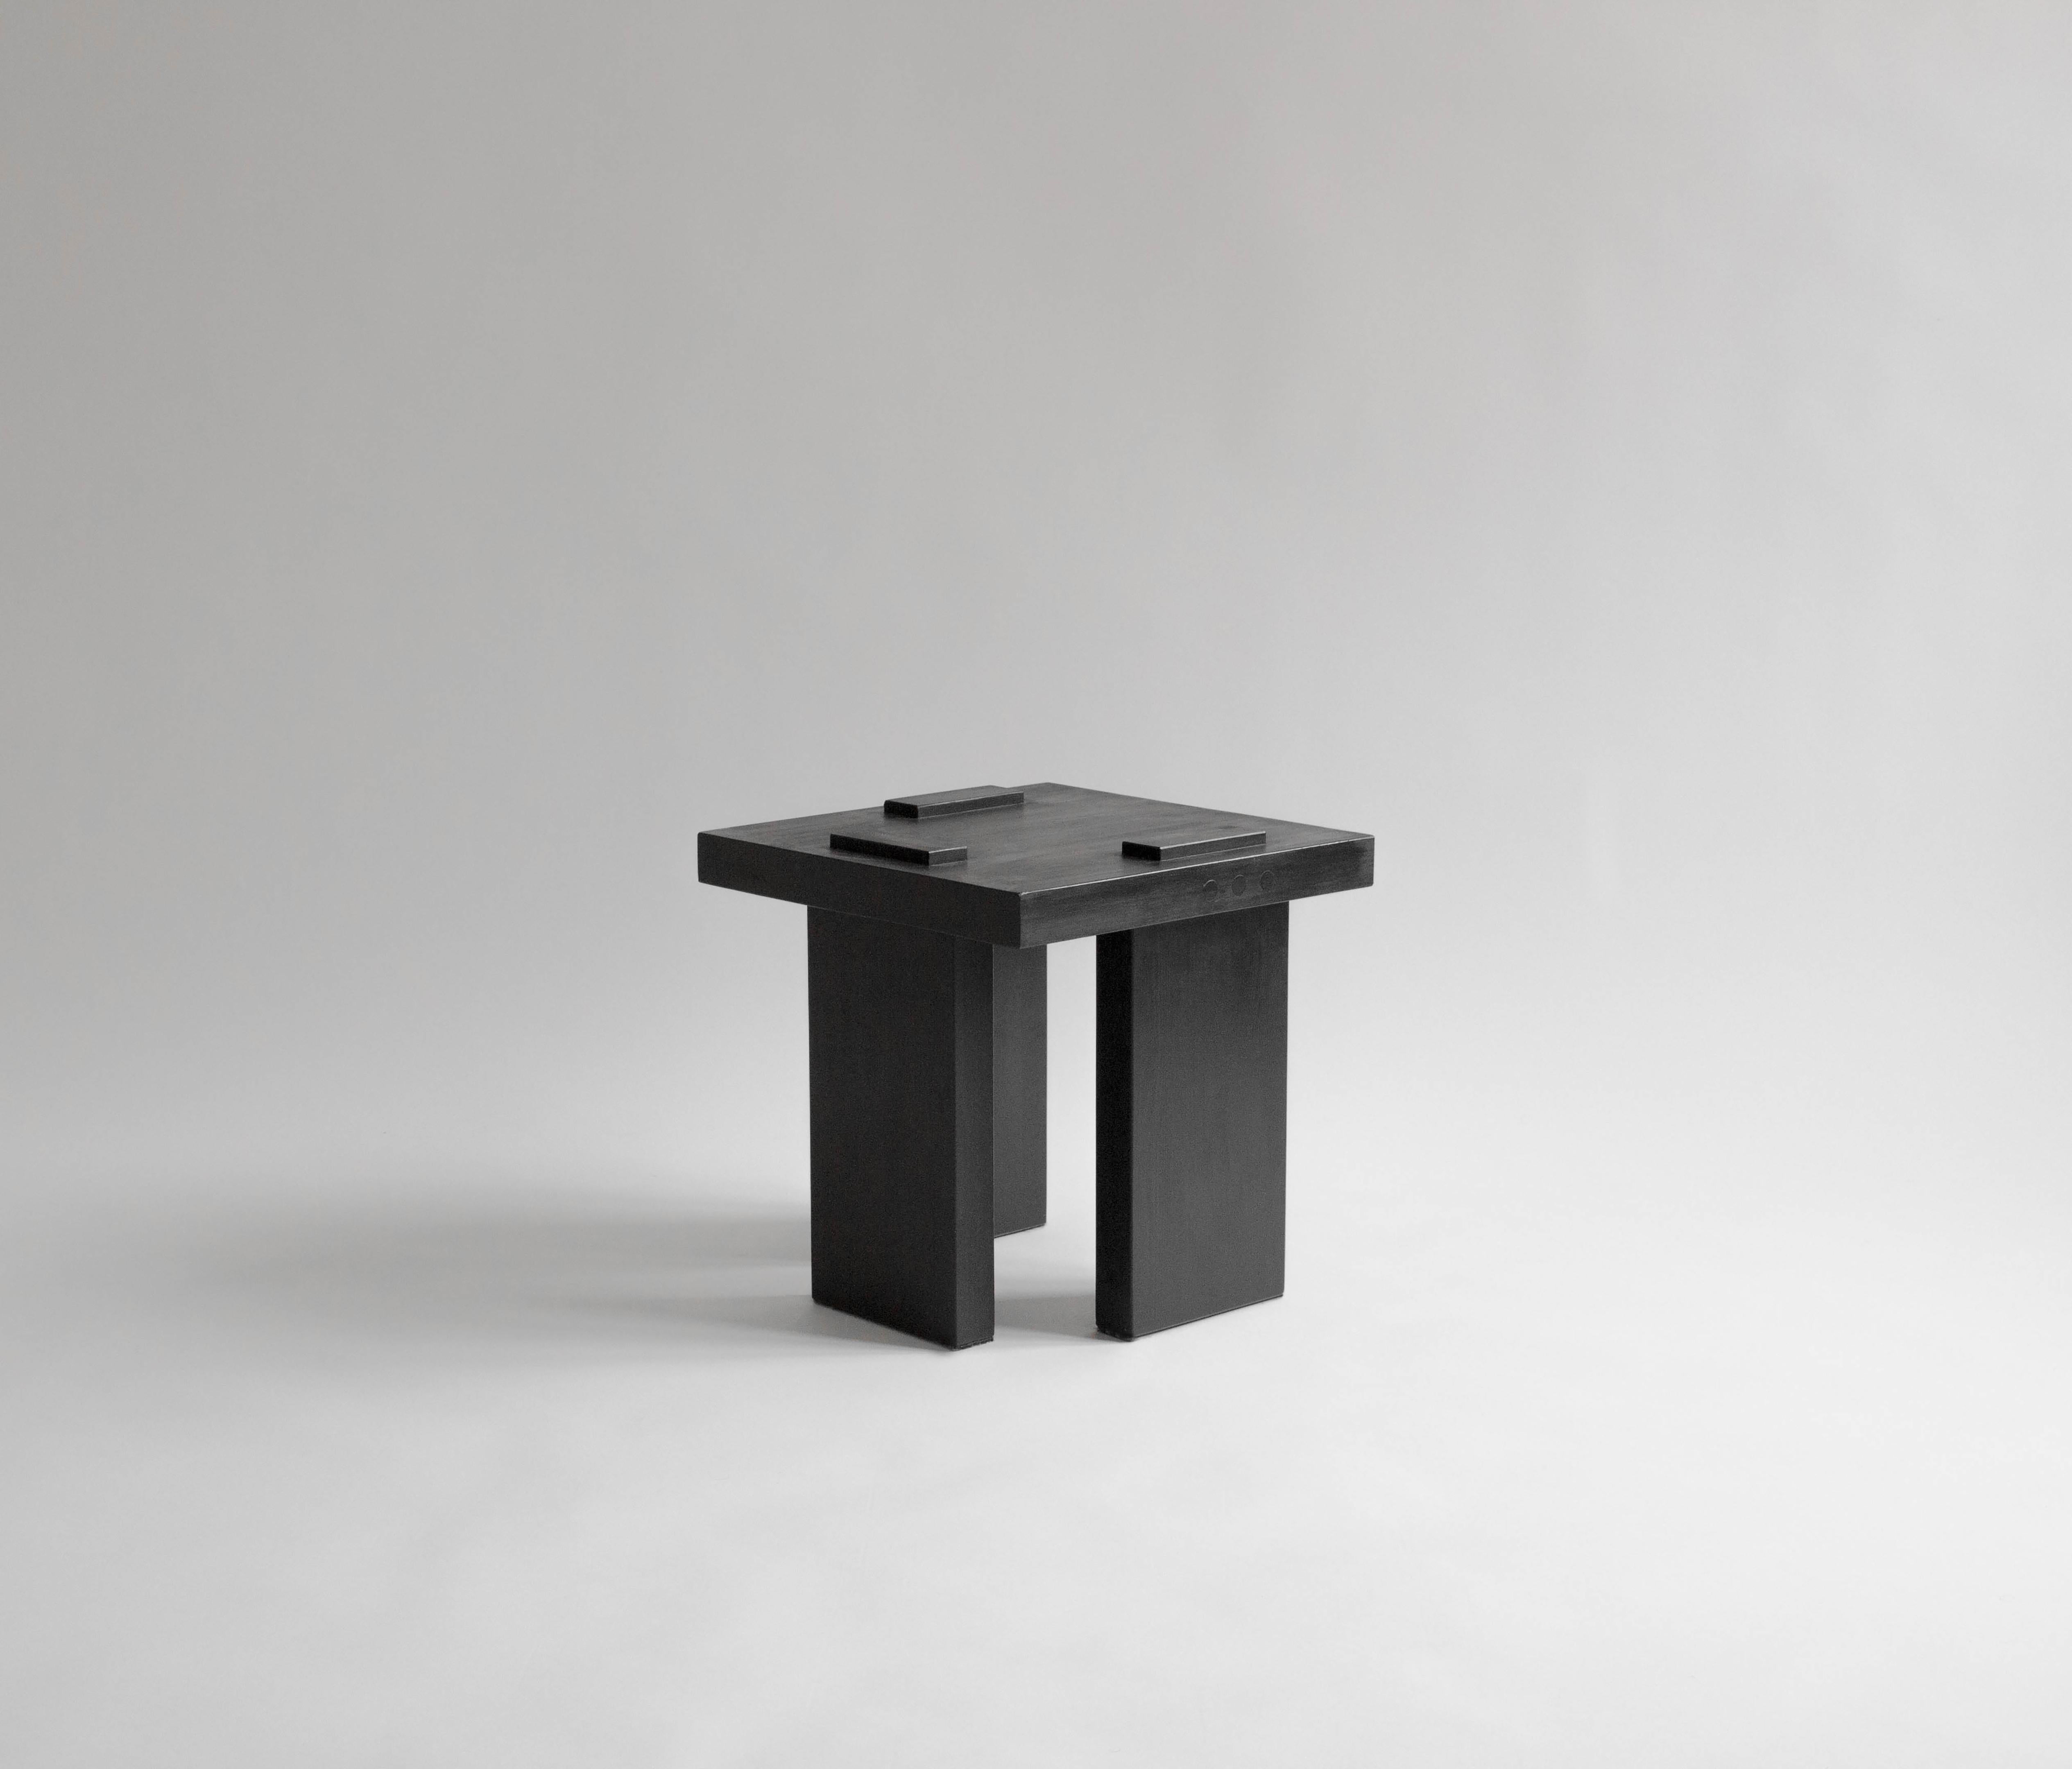 ItooRaba stool by Sizar Alexis
Signed
Dimensions: length 40 x width 40 x height 38cm.
 seat height: 42cm

Comes in stained black, white and natural pine.

A furniture series that embraces geometrical shapes. Inspired by the passion for